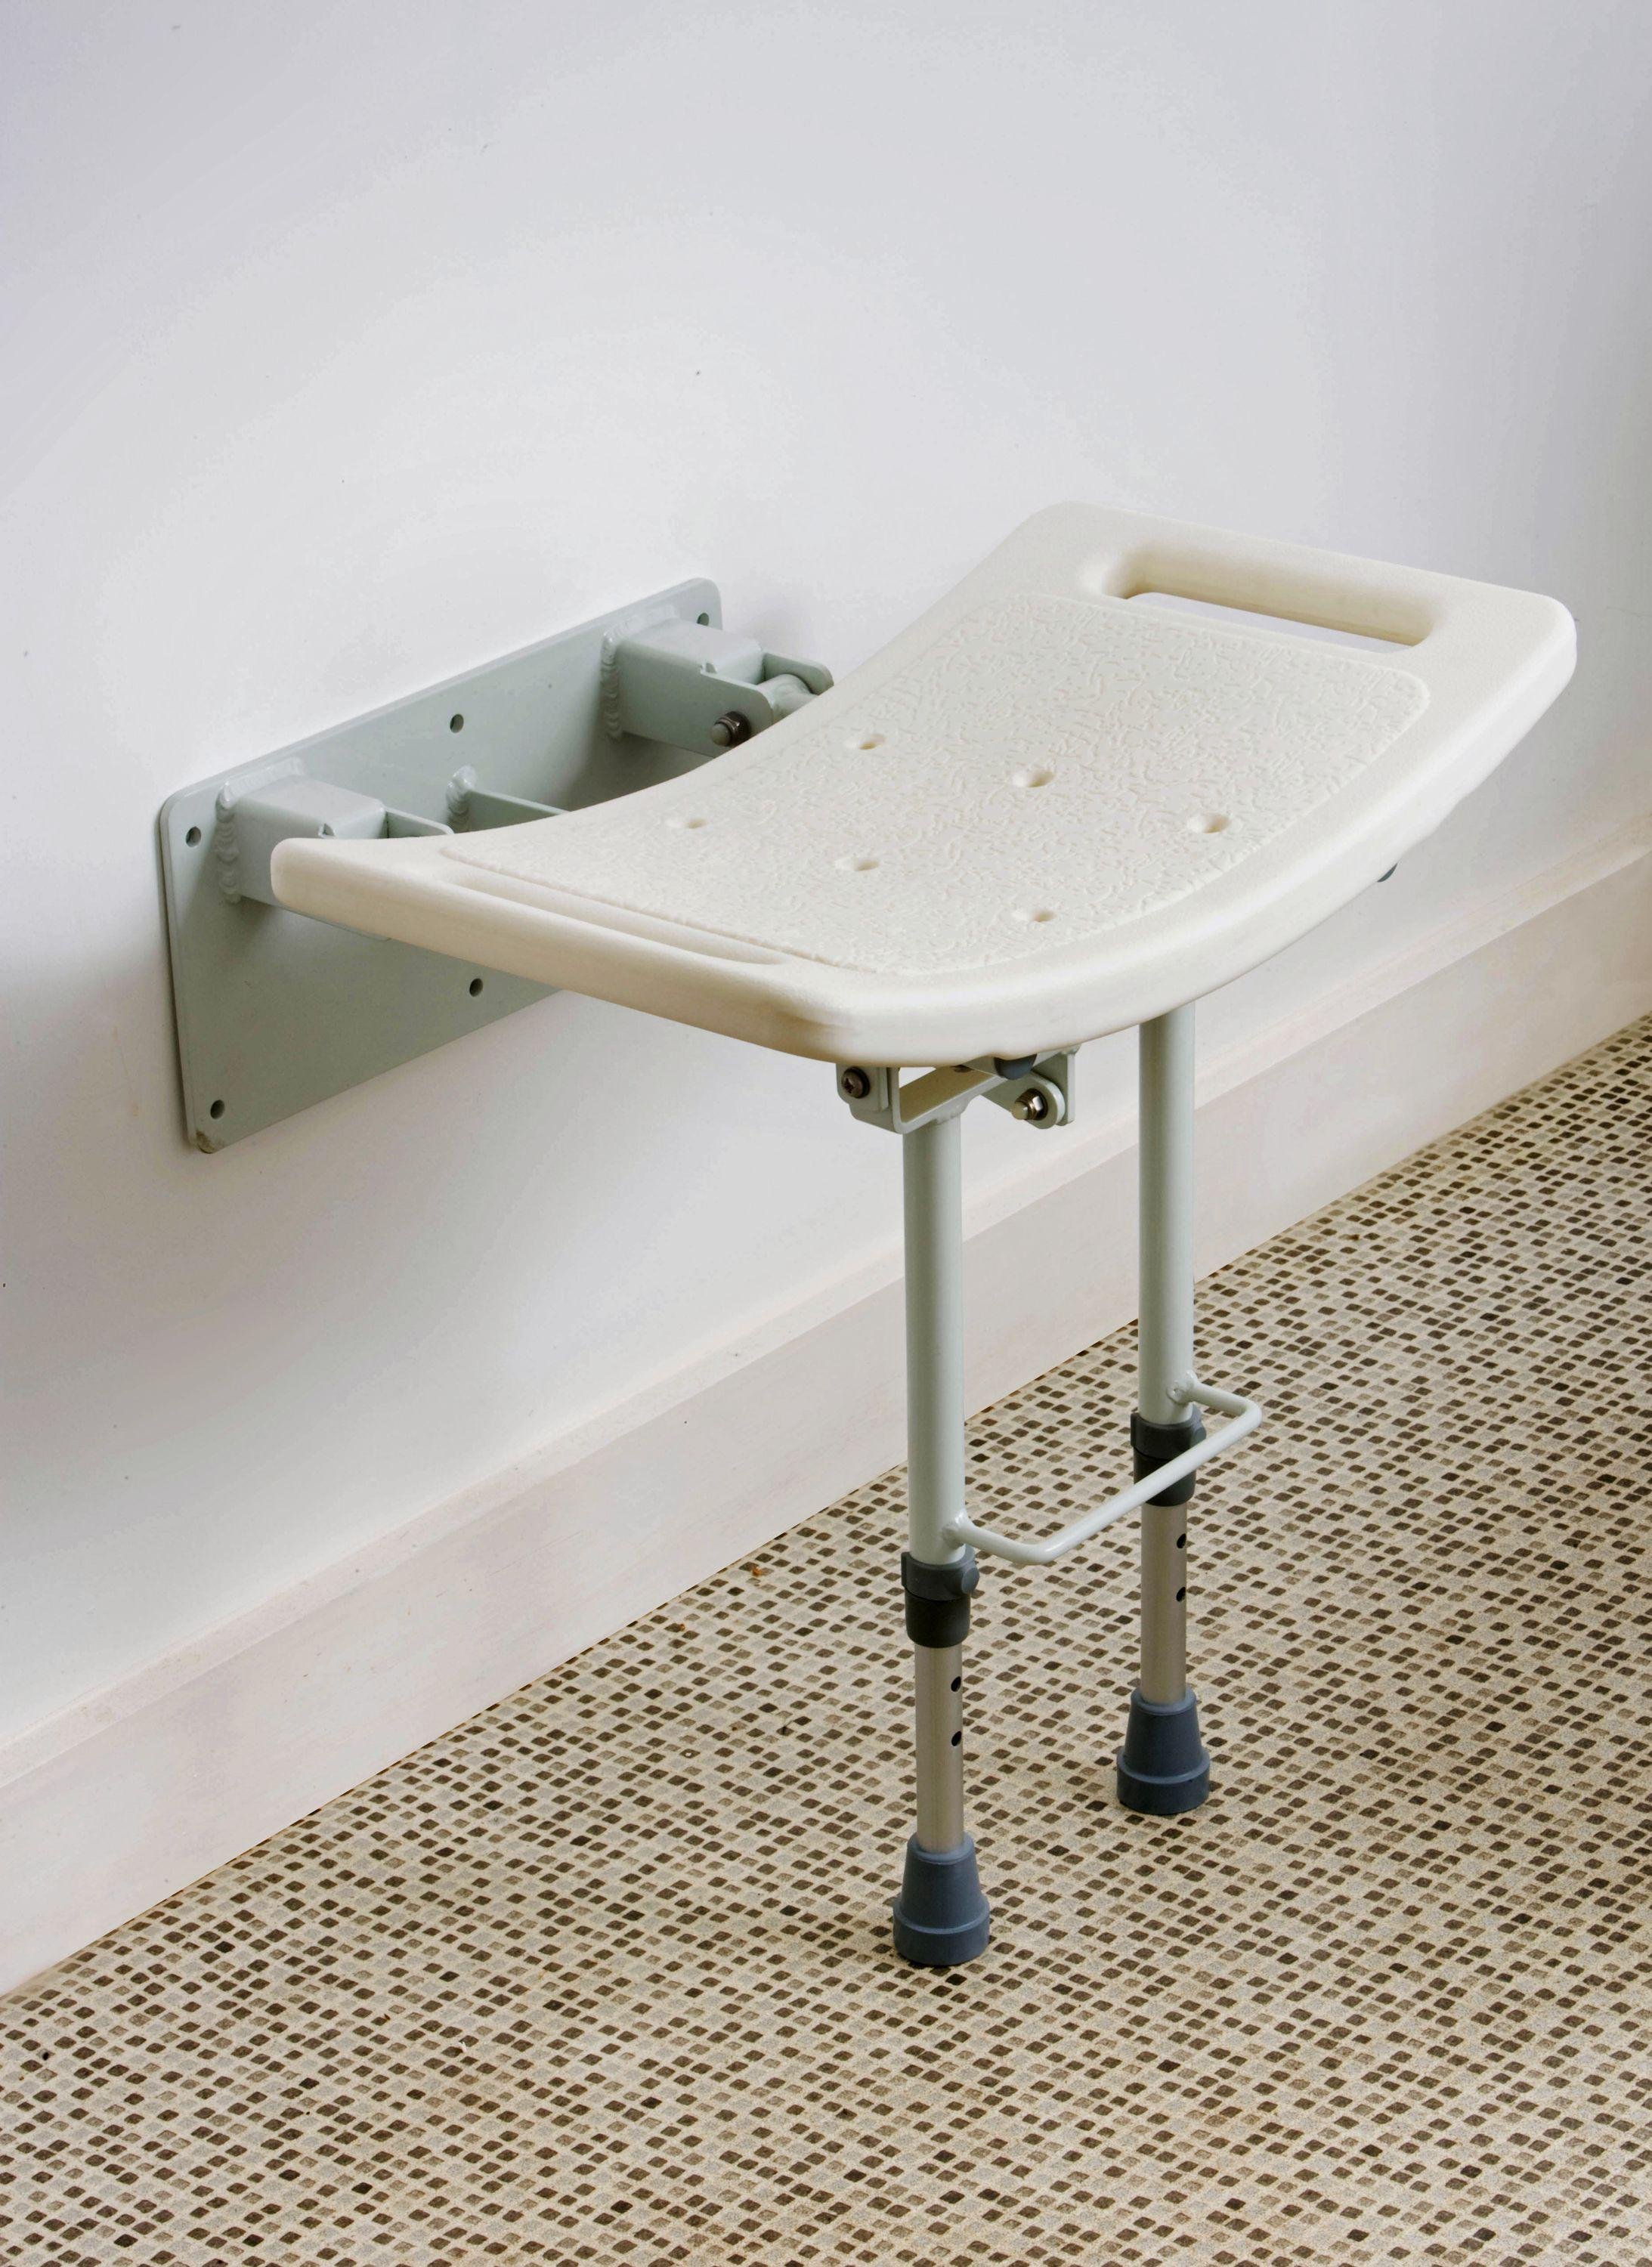 Shower Seat with Legs - Wall Mounted